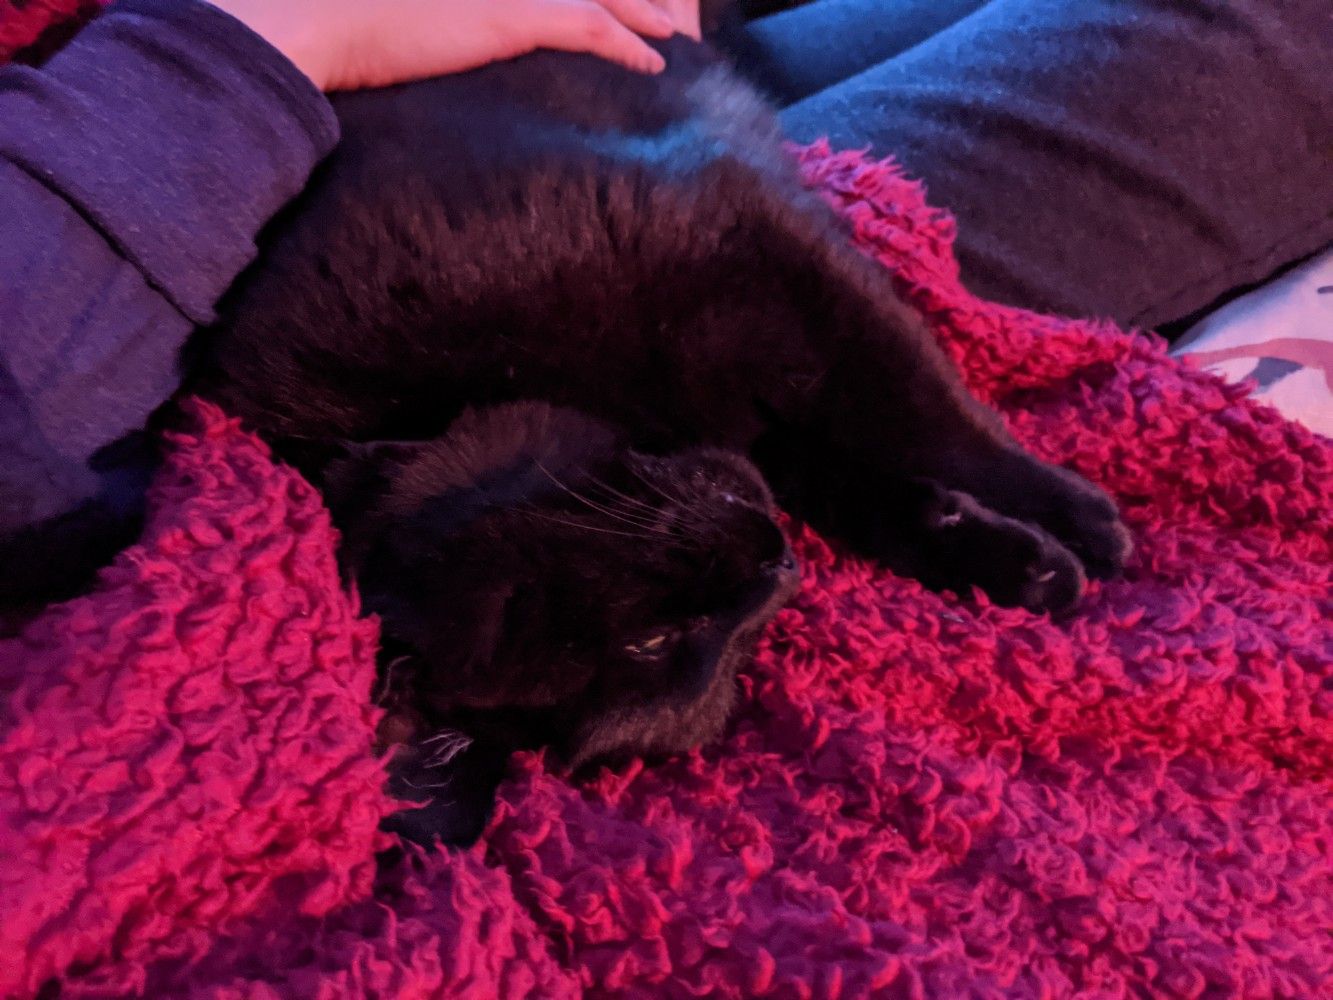 Black cat curled off Anna's lap, a little upside down